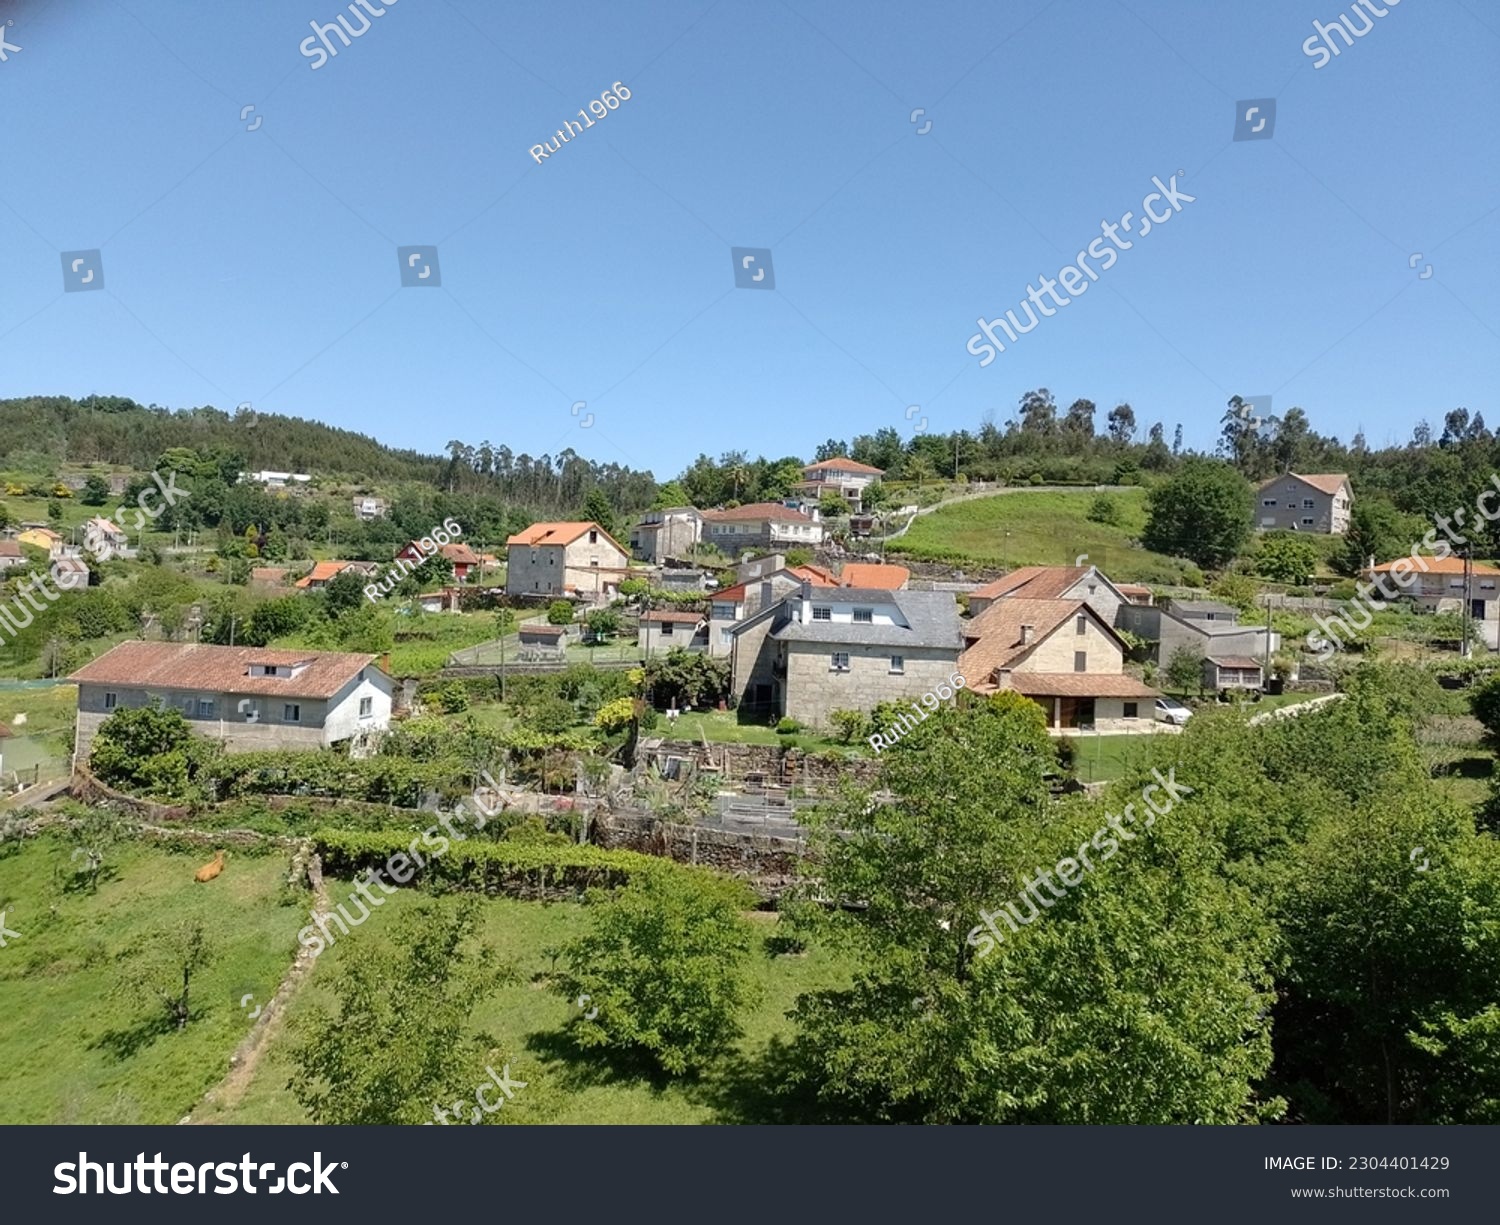 Beautiful view of the gently rolling countryside of Galicia. In spring, when life awakens, all the trees are green and the sky is bright blue. Typical Galician houses stand sporadically in the landsca #2304401429